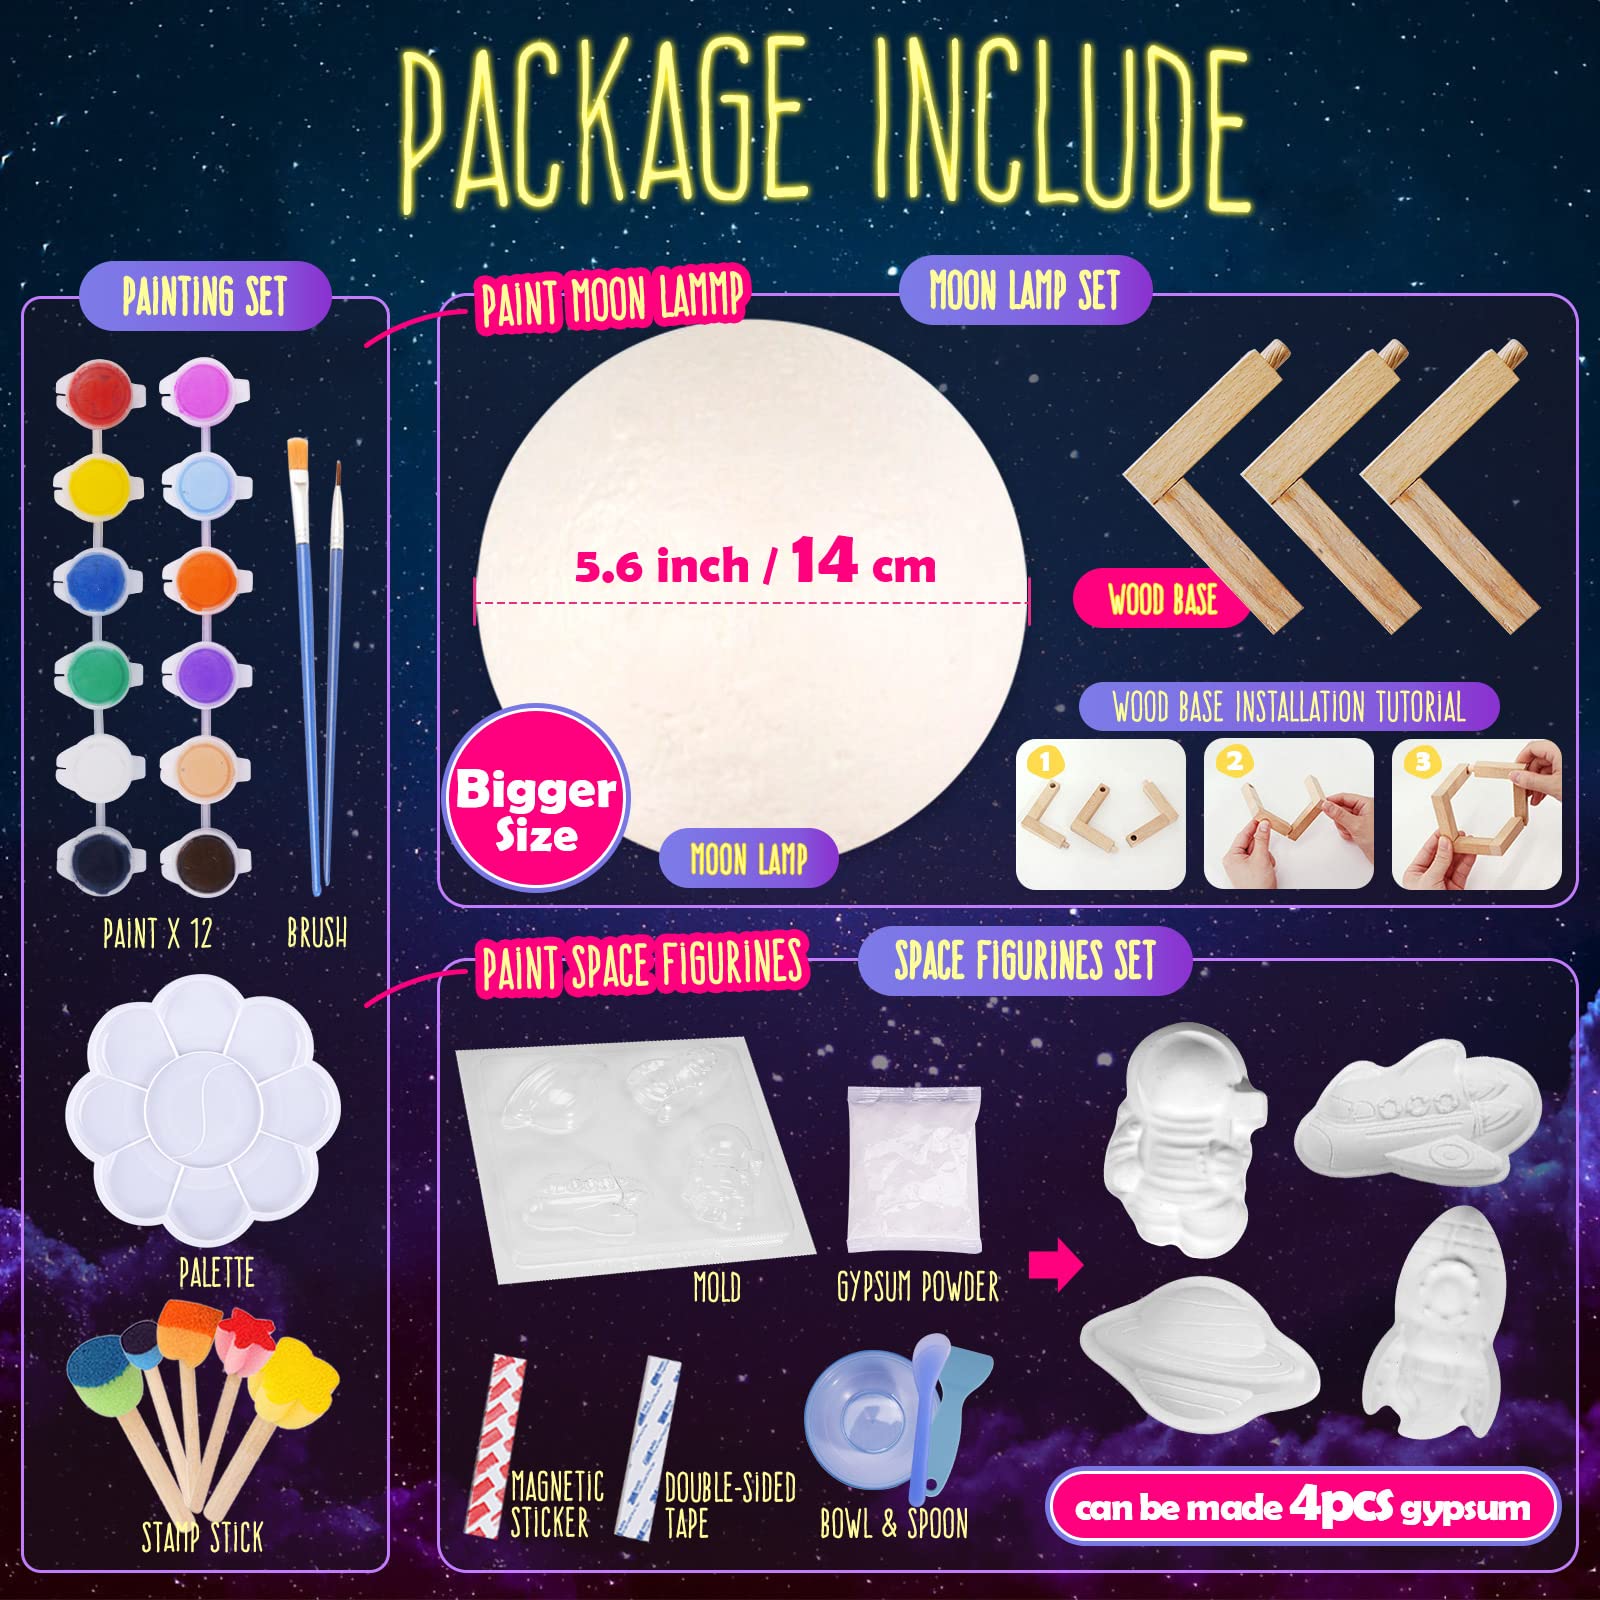 Paint Your Own Moon Lamp Kit, Cool Gifts DIY 3D Space Moon Night Light, Art Supplies Arts & Crafts Kit, Arts and Crafts for Kids Ages 8-12, Toys Girls Boy Birthday Gift Ages 3 4 5 6 7 8 9 10 11 12+